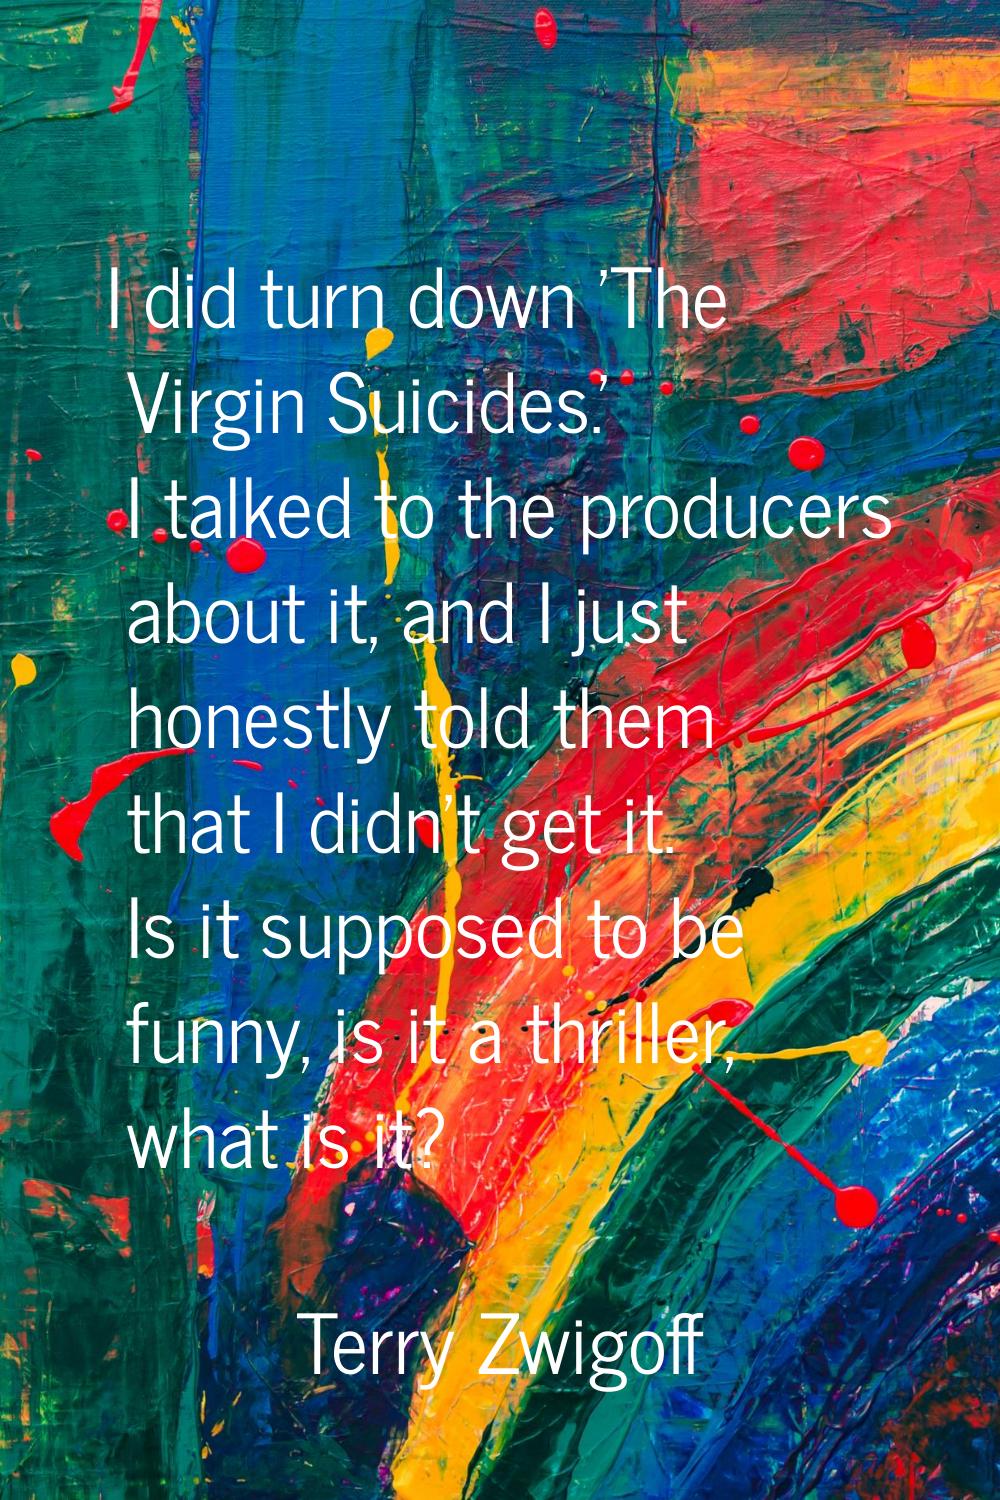 I did turn down 'The Virgin Suicides.' I talked to the producers about it, and I just honestly told